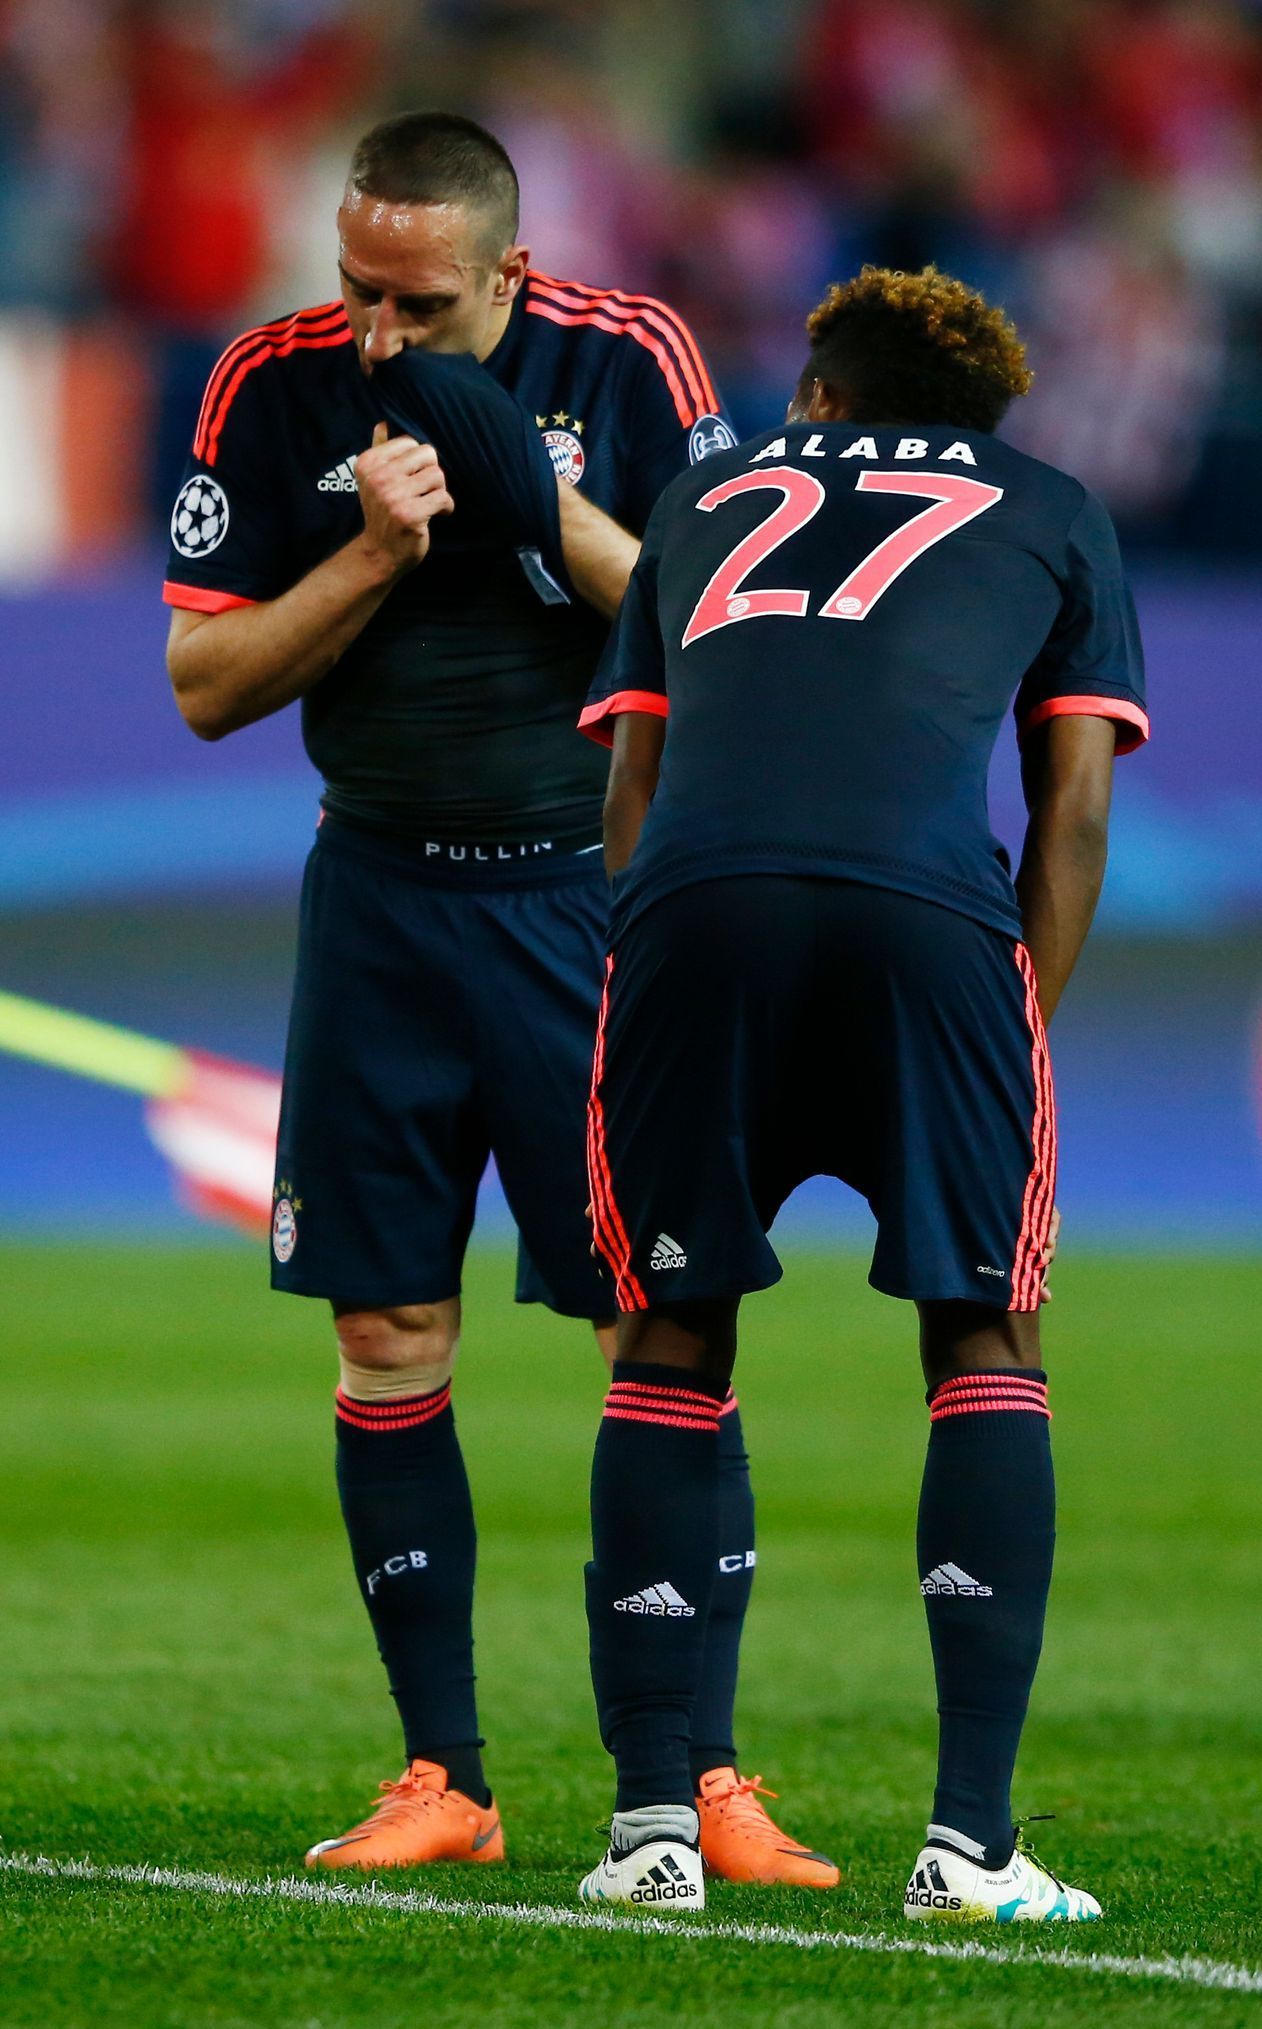 Bayern Munich's Franck Ribery and David Alaba look dejected at the end of the match